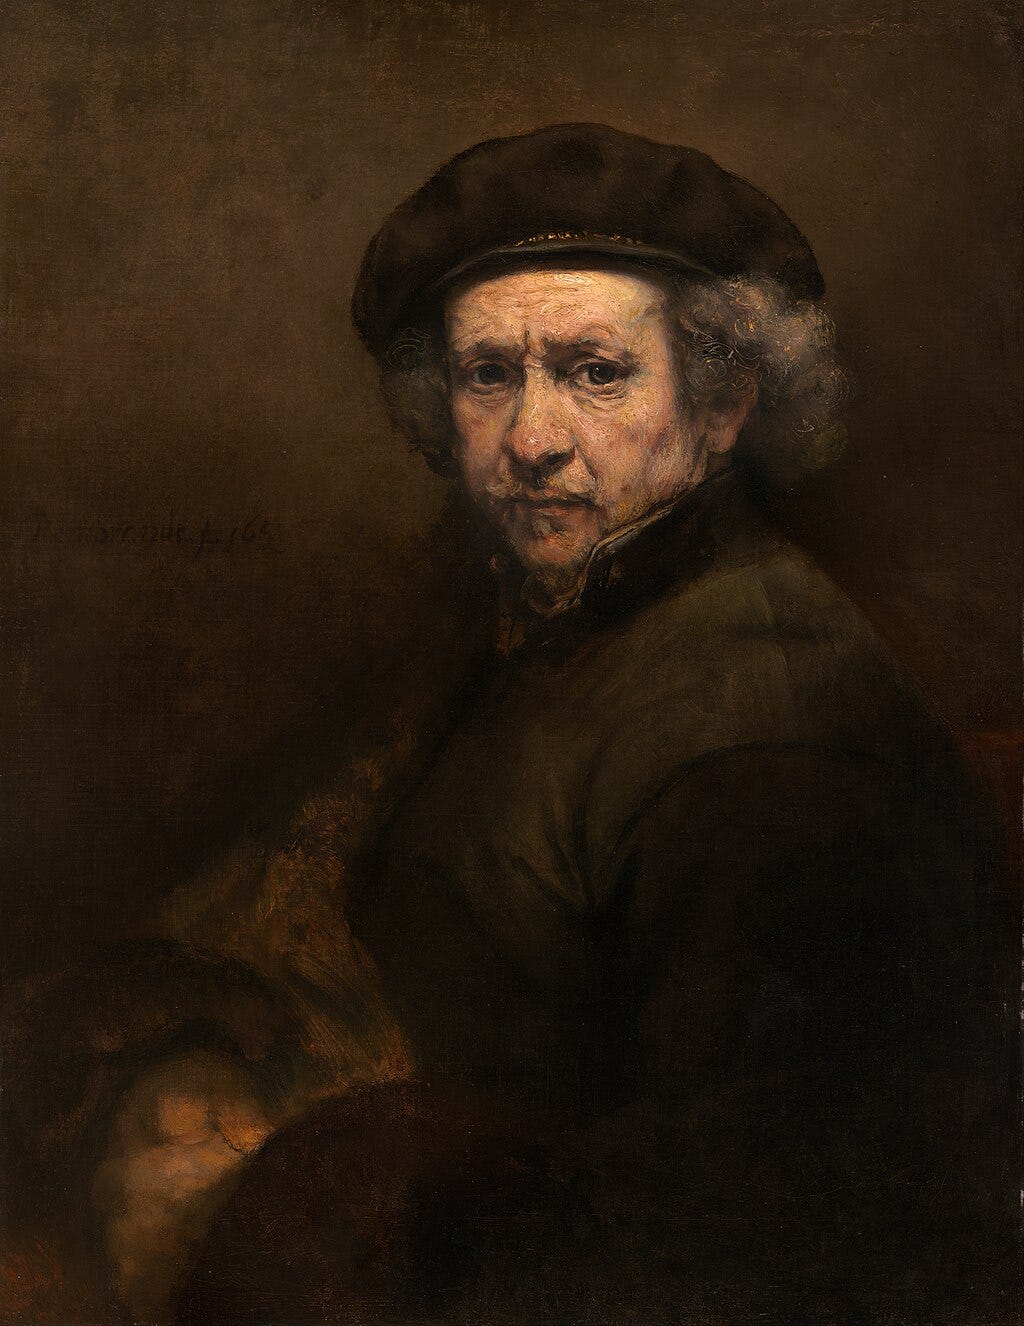 Self-Portrait with Beret and Turned-Up Collar, 1659. National Gallery of Art, Washington, D.C.